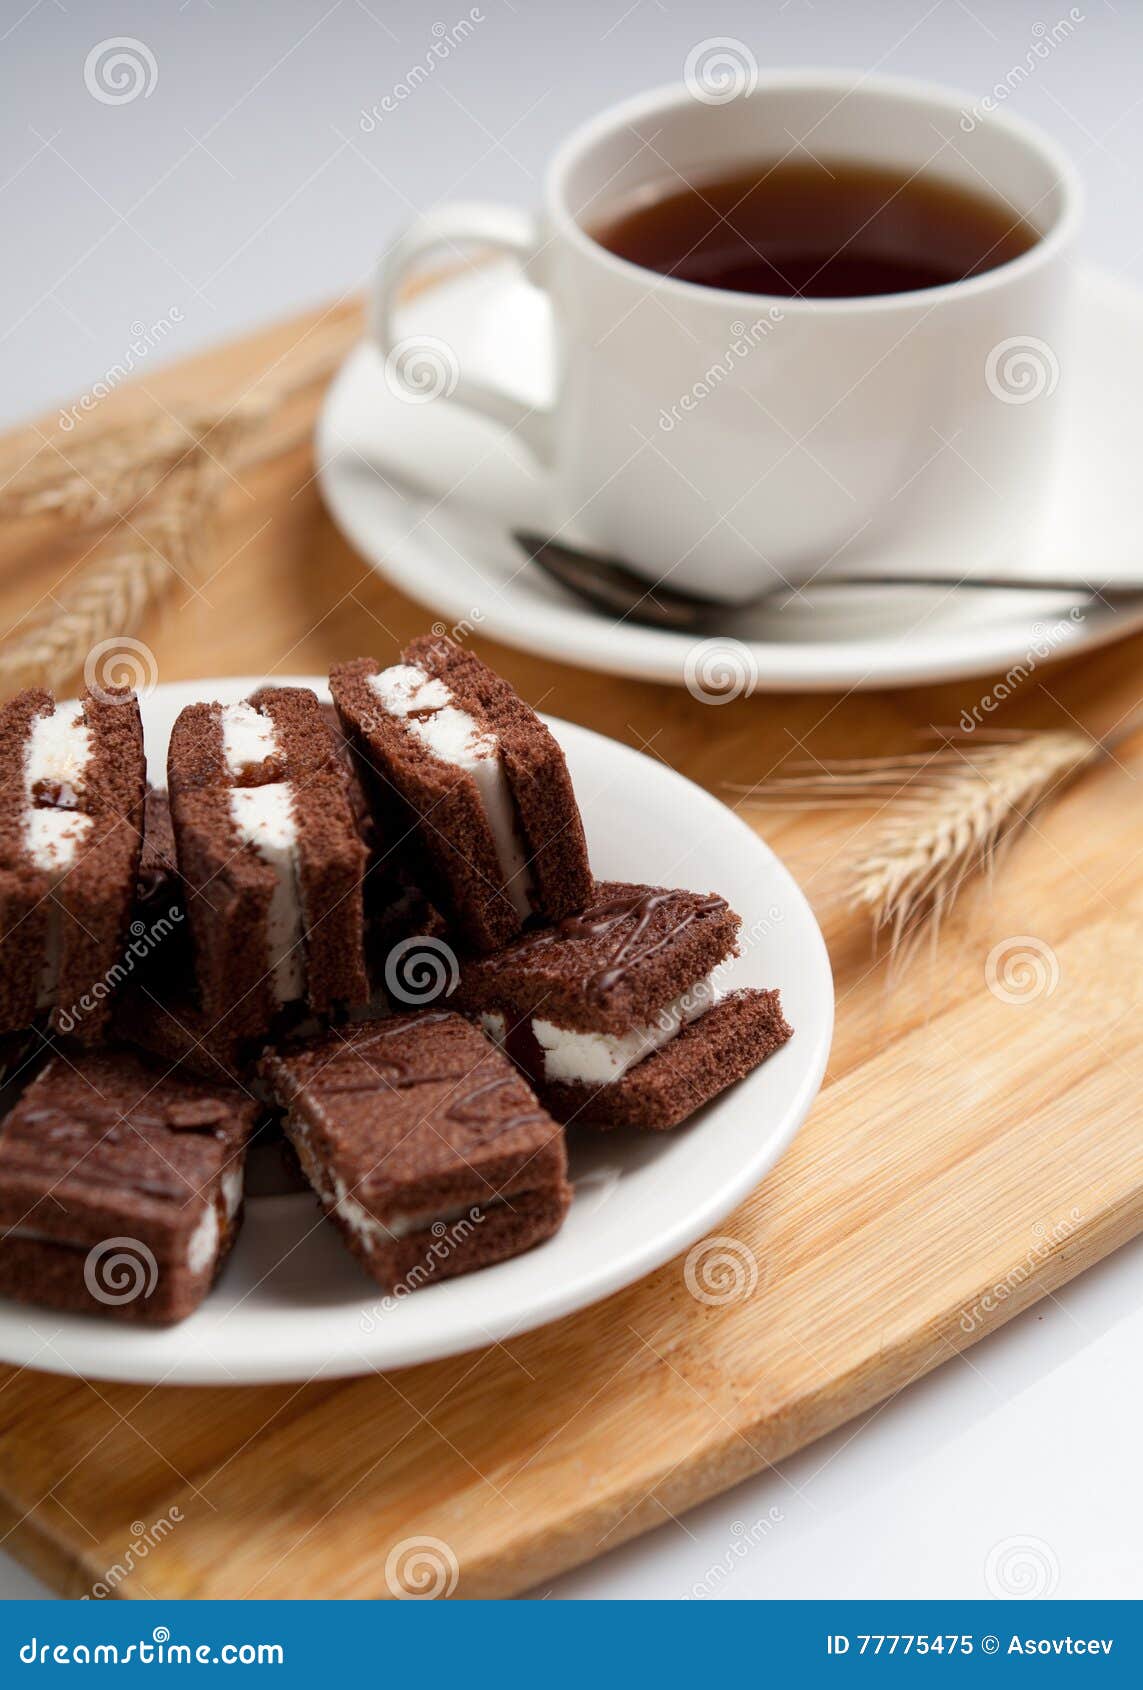 Tea and Cakes Desert Simple Composition Village Style Stock Image ...